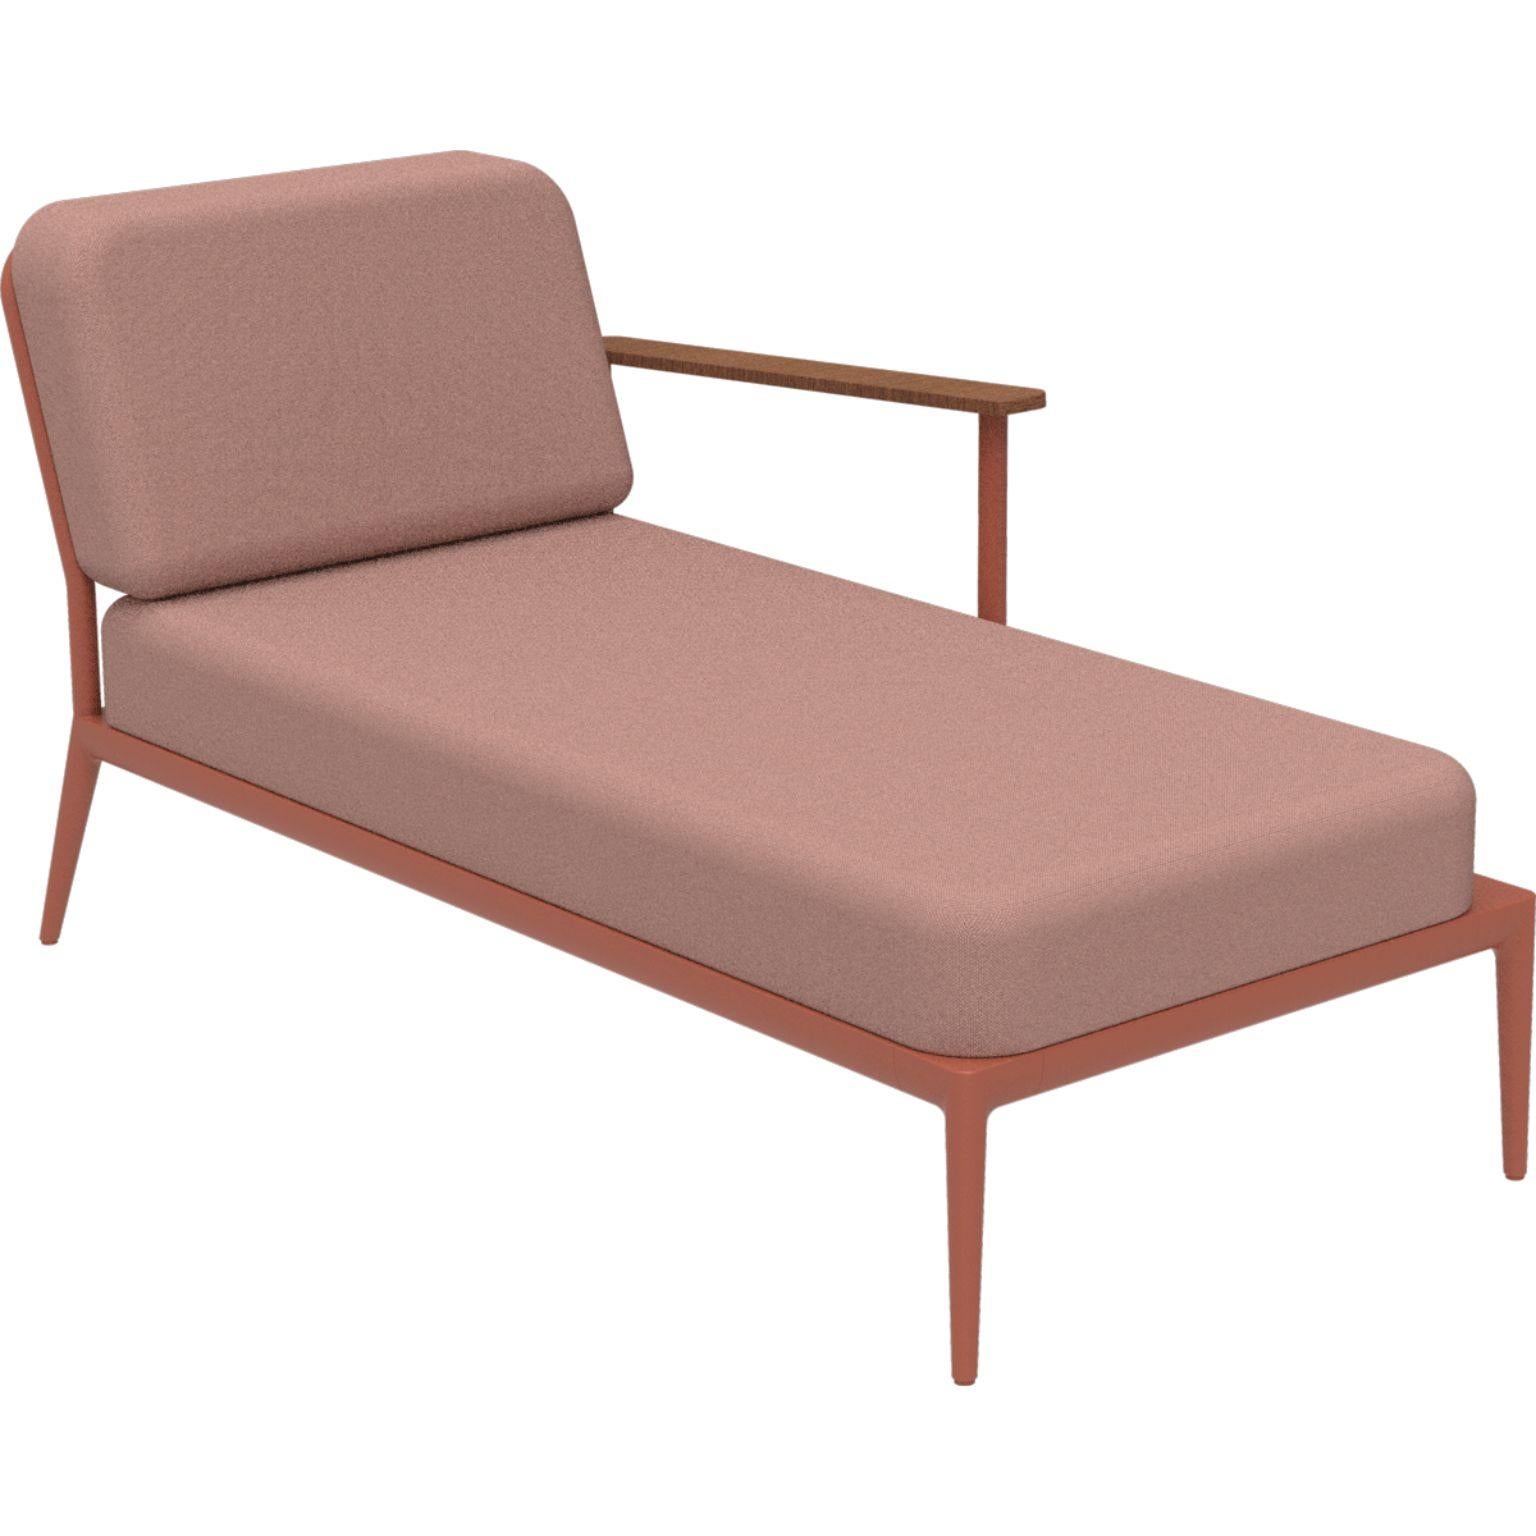 Nature Salmon Left Chaise Longue by MOWEE
Dimensions: D155 x W76 x H81 cm (seat height 42 cm).
Material: Aluminum, upholstery and Iroko Wood.
Weight: 28 kg.
Also available in different colors and finishes. Please contact us.

An unmistakable